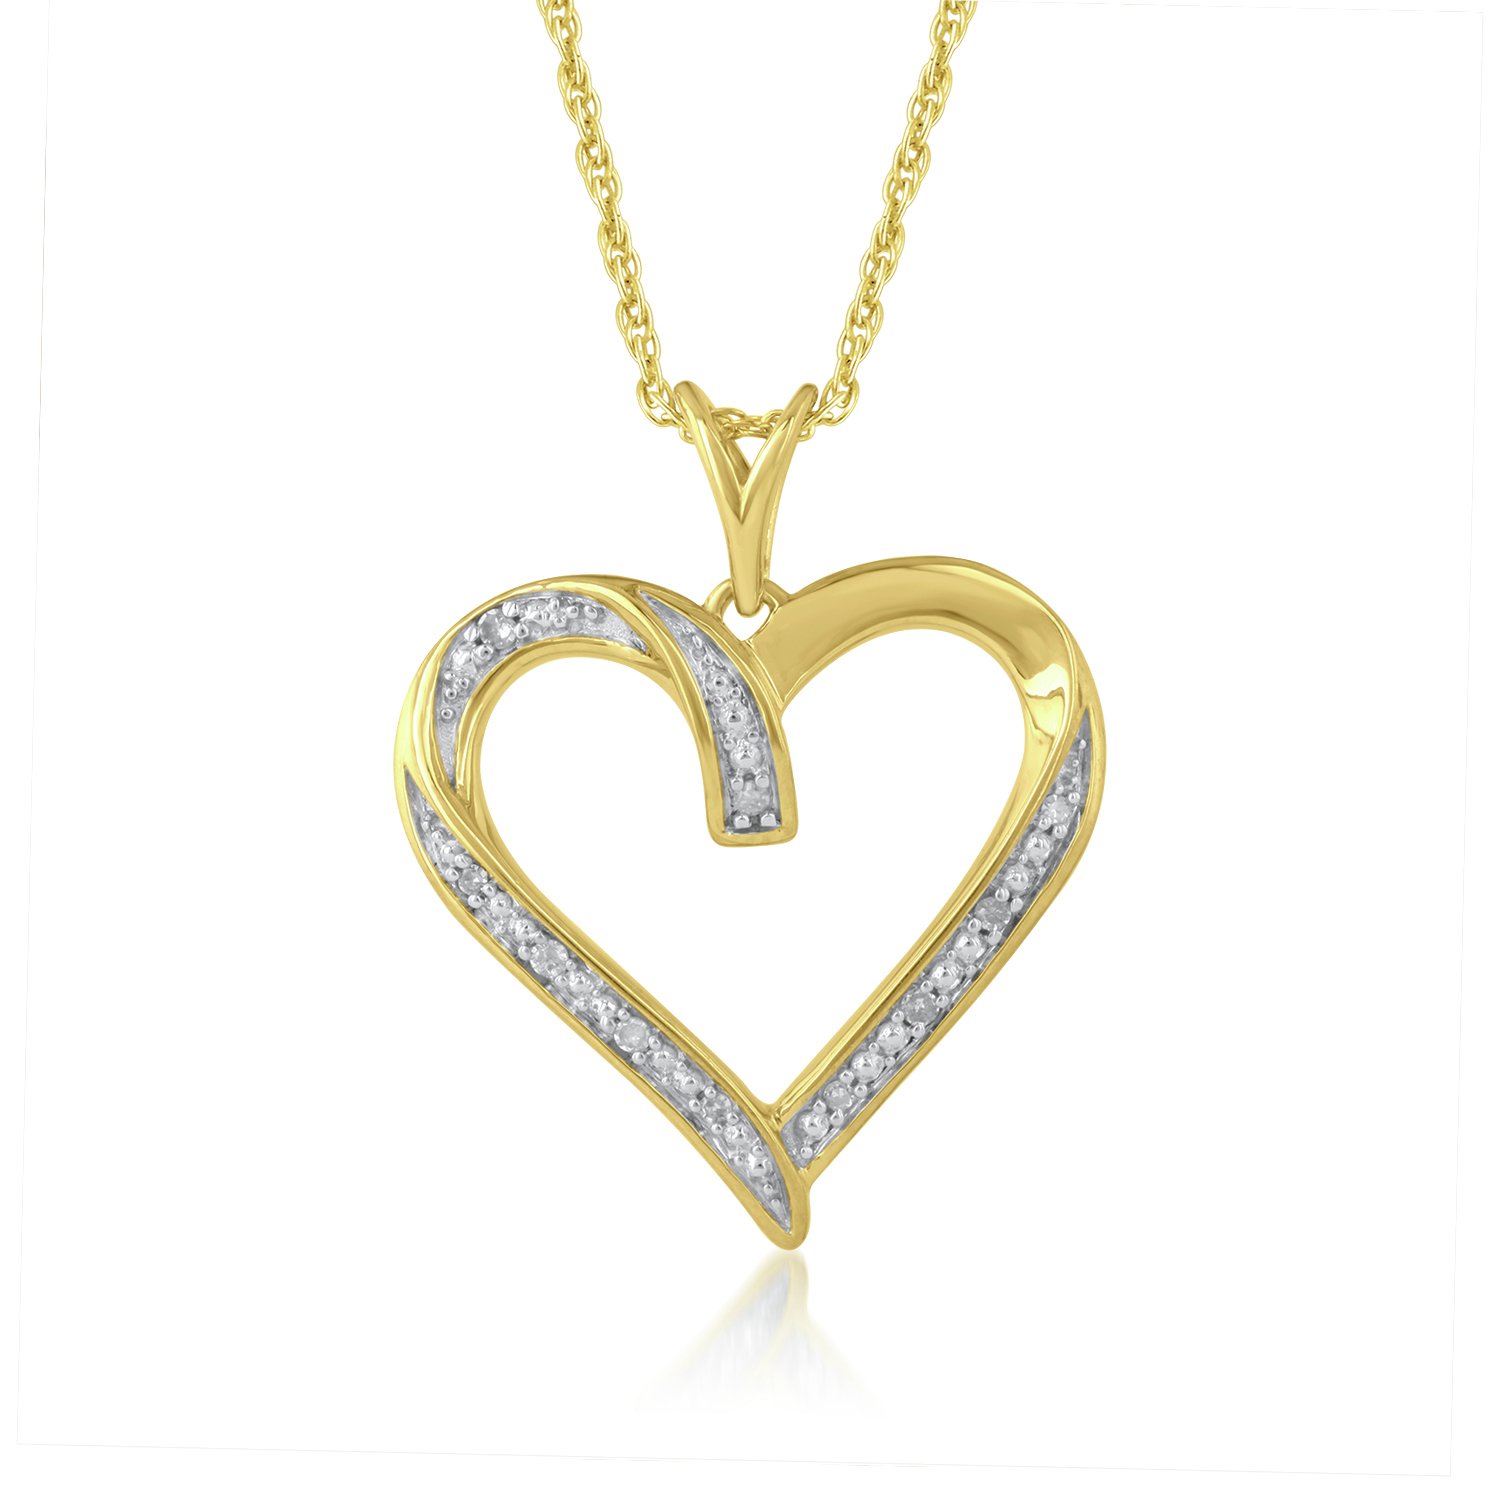 Revere 9ct Gold Plated Diamond Heart  Pendant Necklace